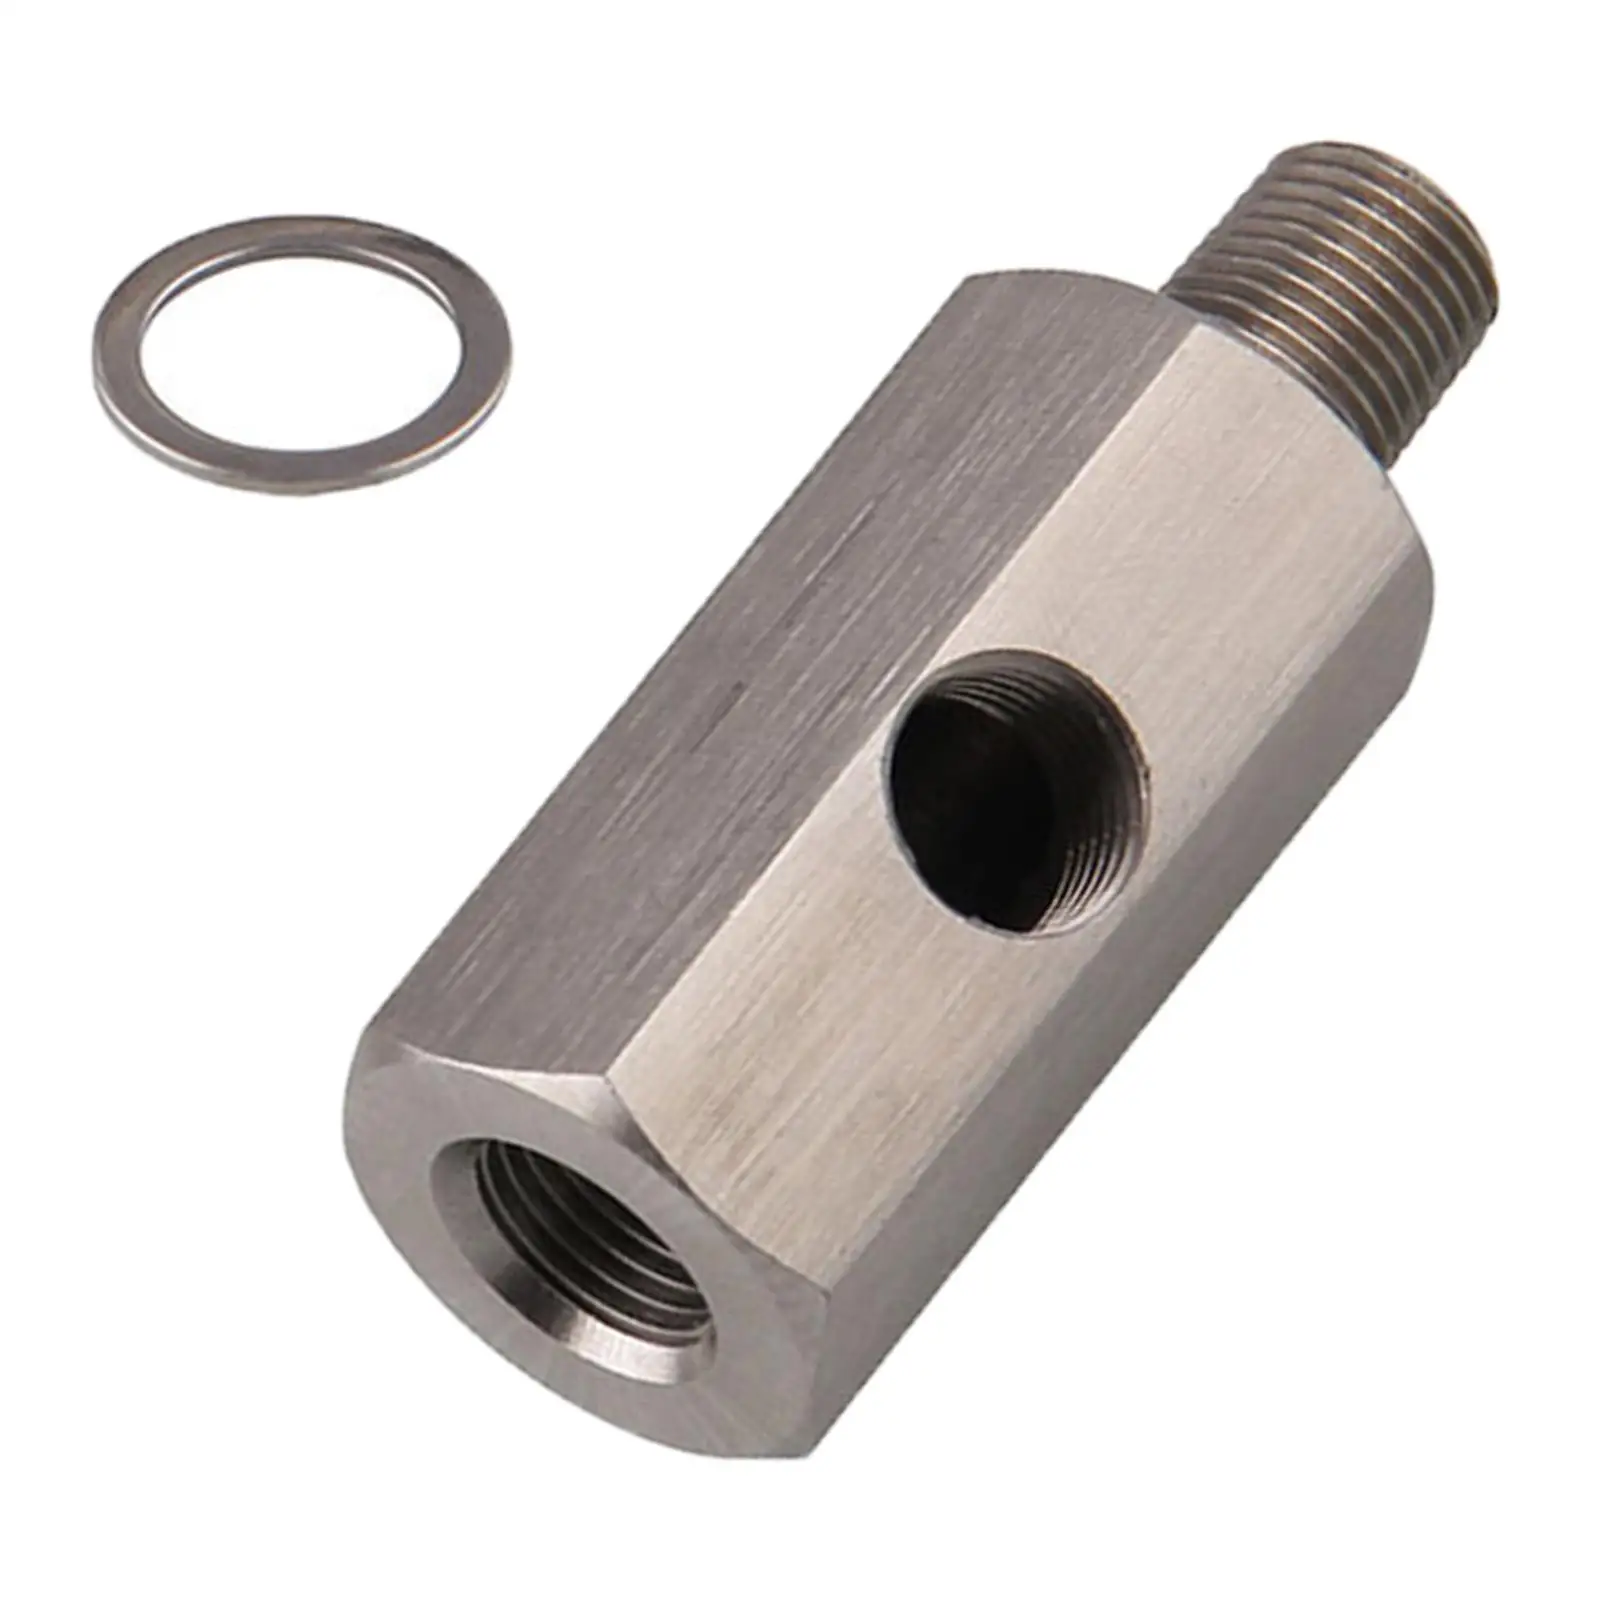 Automobile Oil Pressure Sensor Tee 1/8``Npt Adapter Turbo Supply Easy to Install Durable feed Line Gauge Accessories Replaces